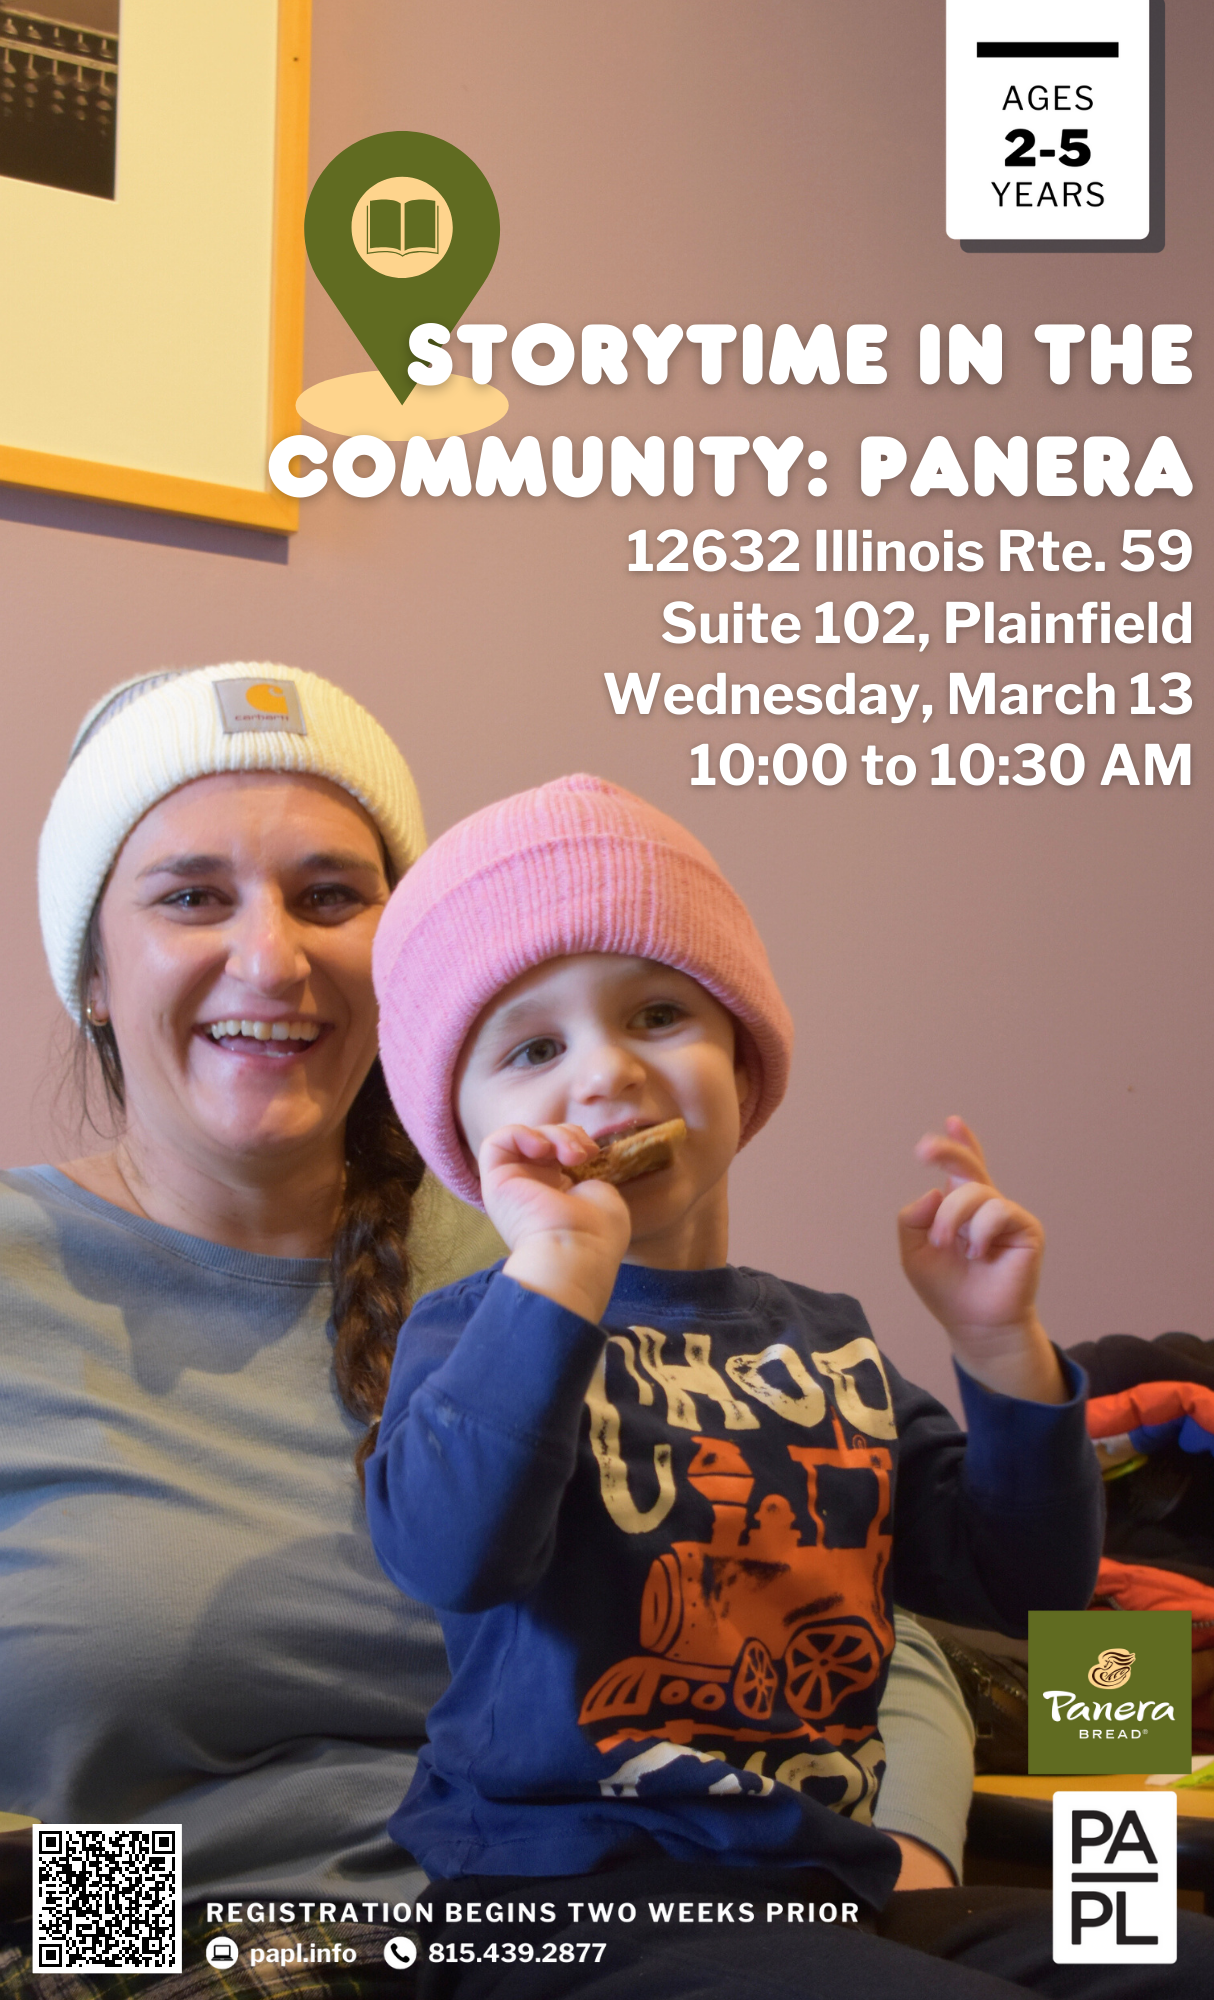 Storytime in the Community: Panera